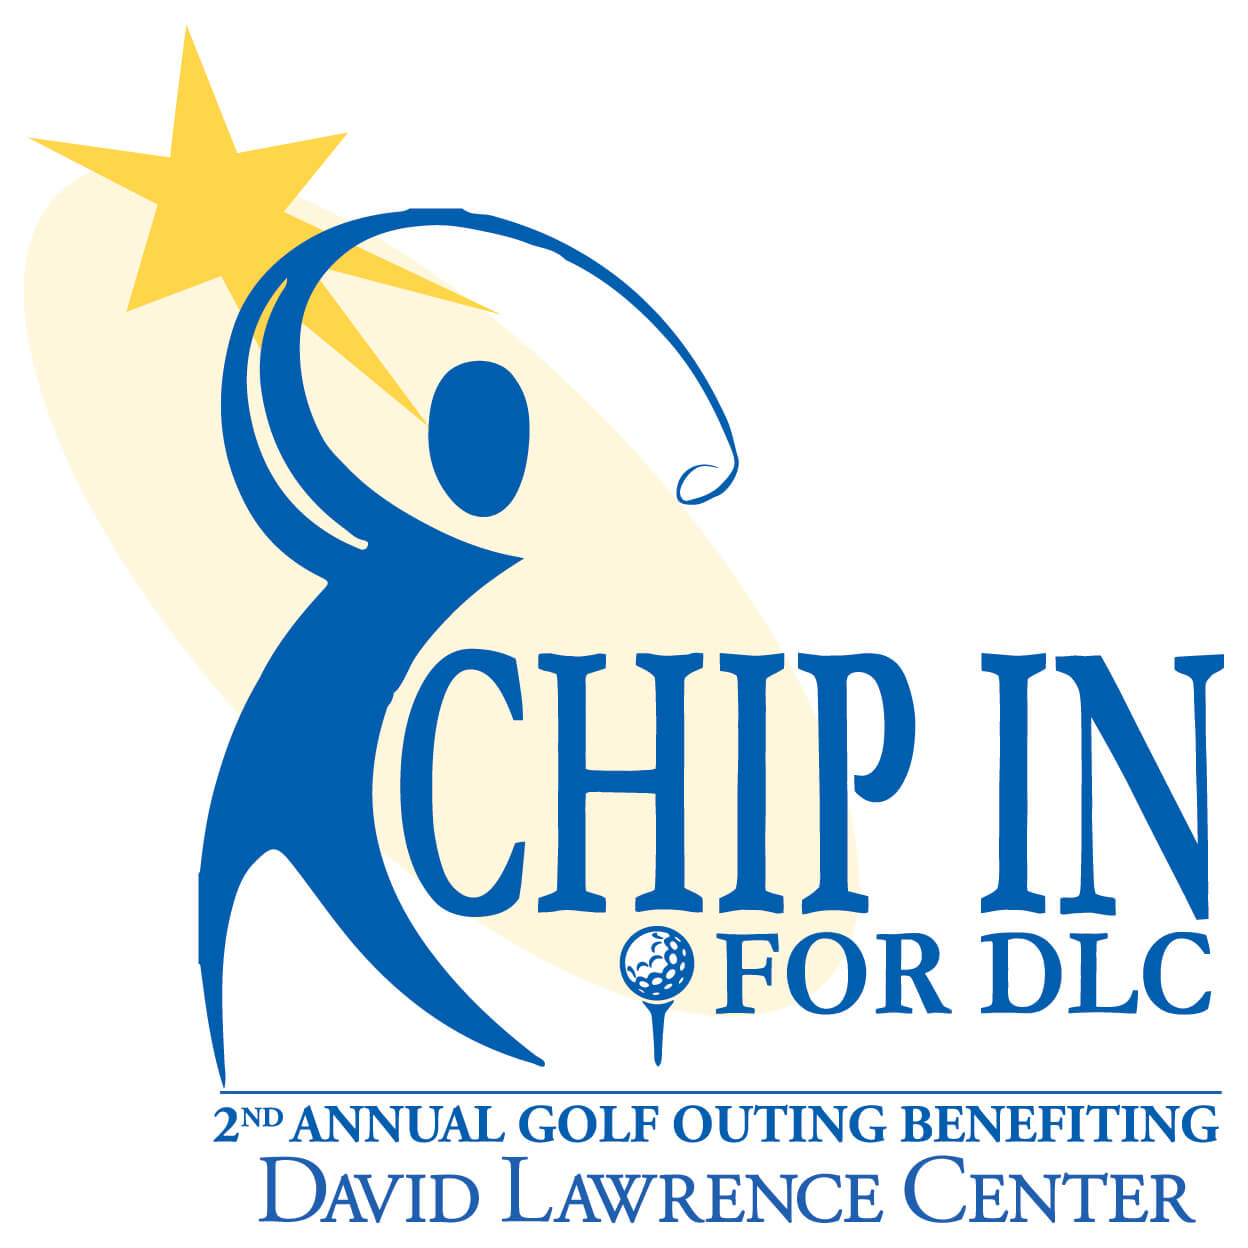 TICKETS AND SPONSORSHIPS NOW AVAILABLE FOR DAVID LAWRENCE CENTER CHIP IN FOR DLC GOLF TOURNAMENT SET FOR OCTOBER 2, 2015